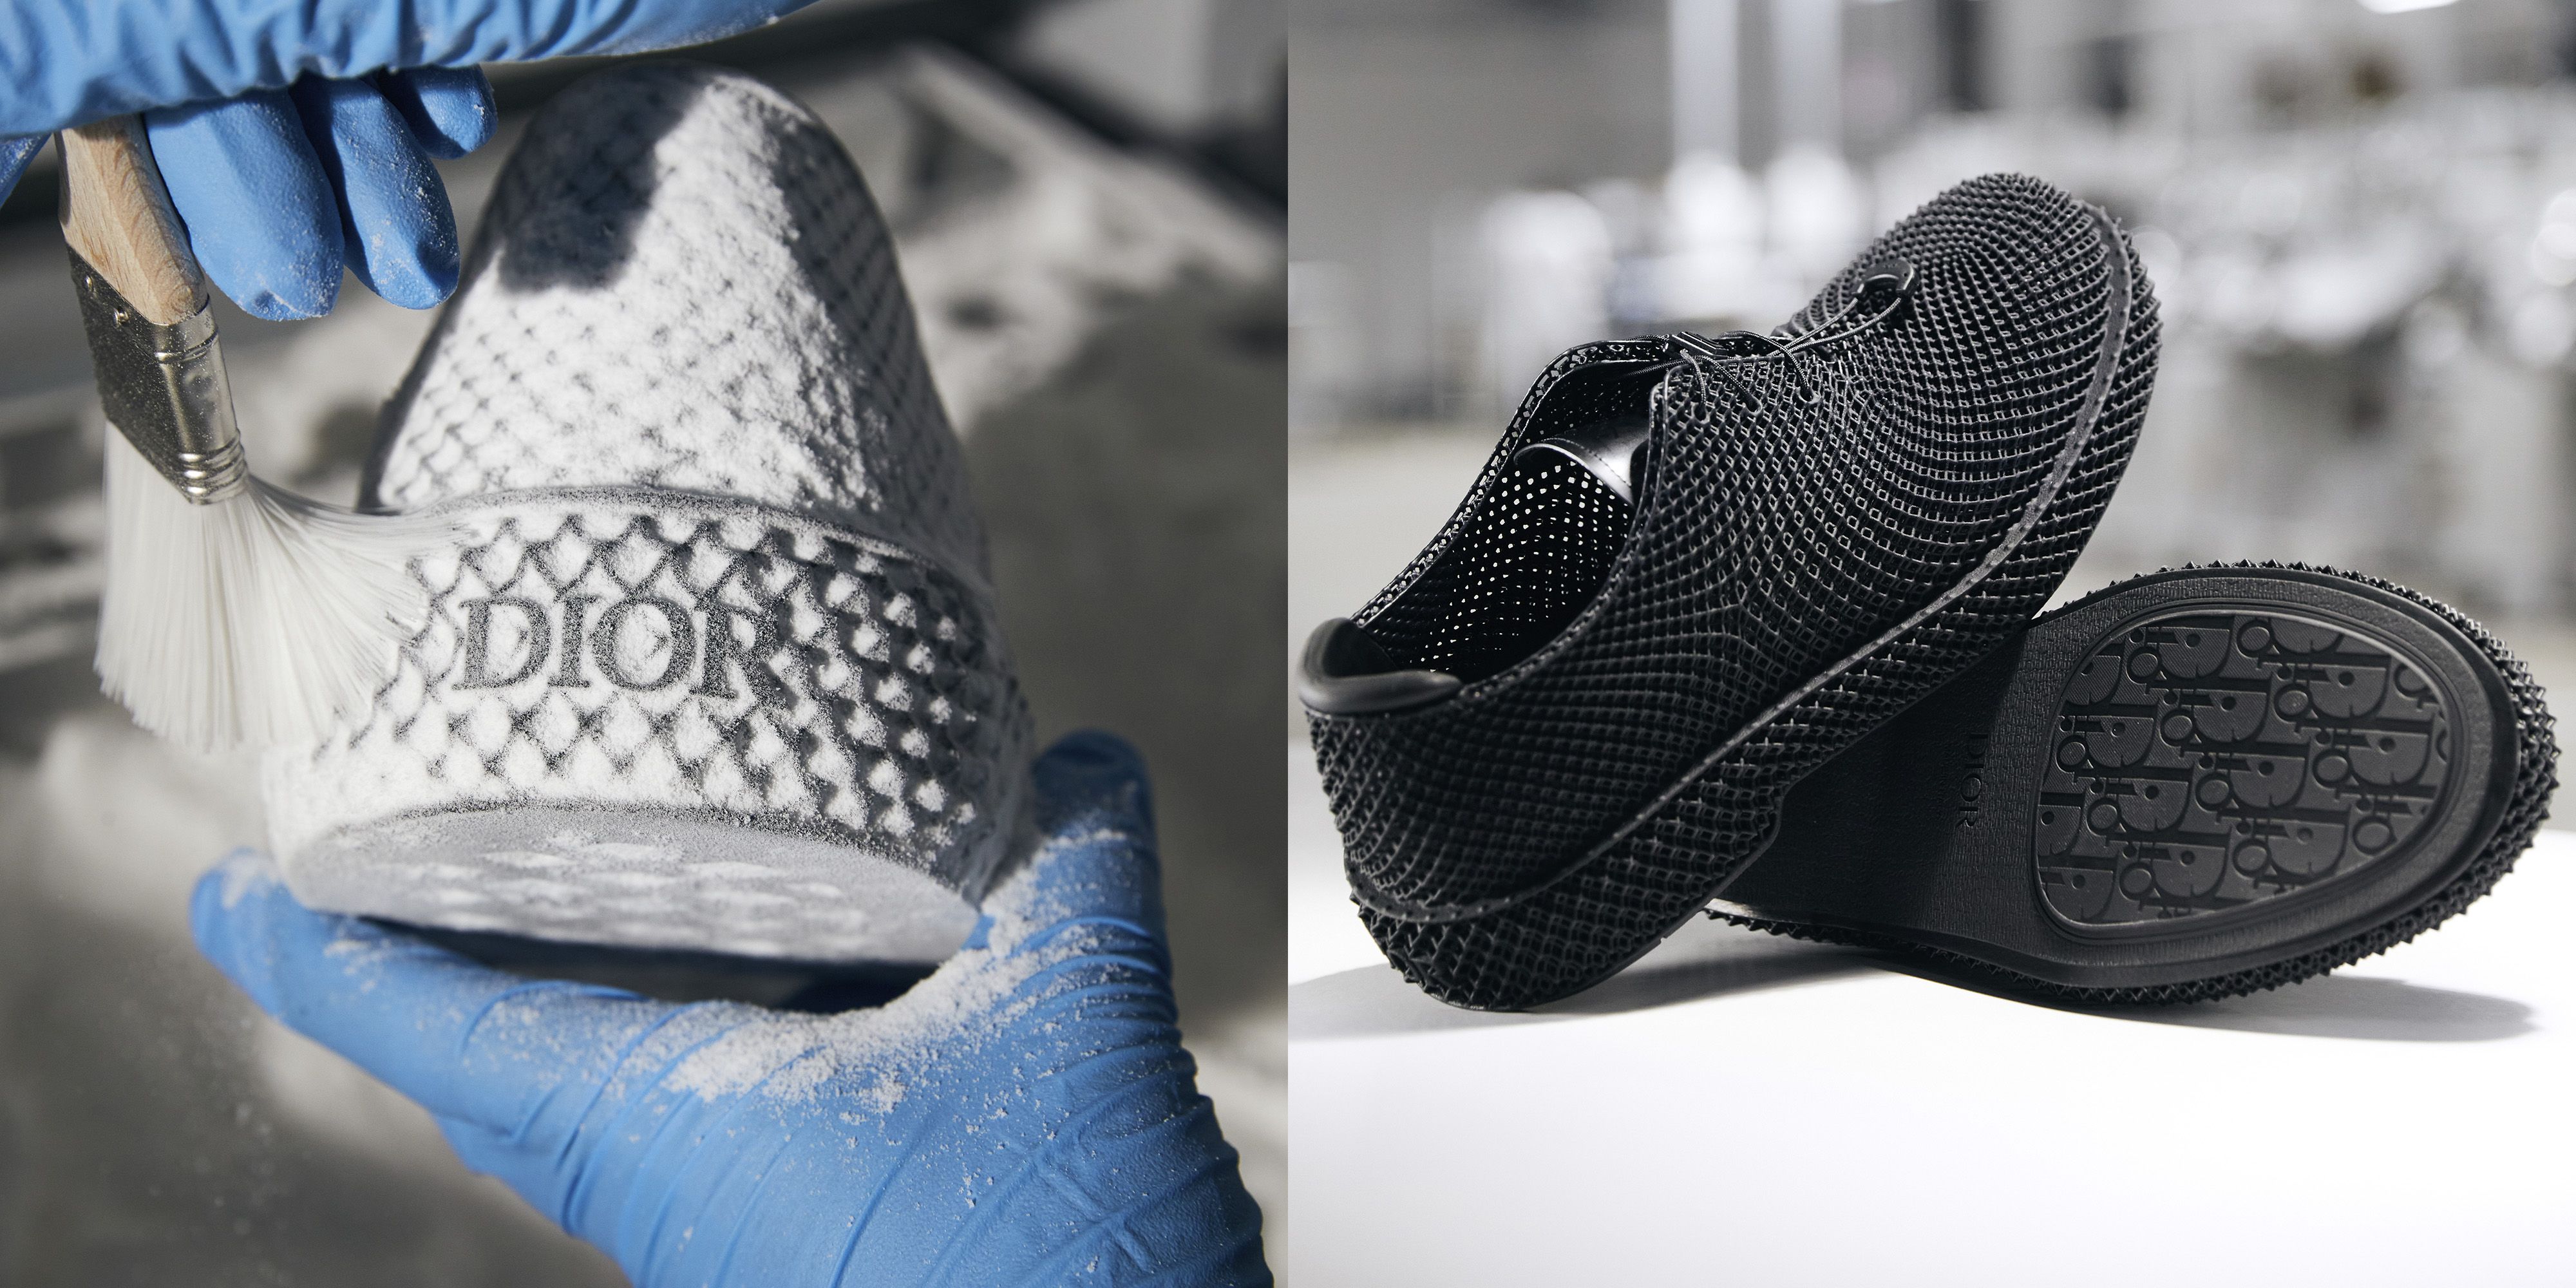 We Can't Stop Thinking About Dior's 3D-Printed Derby Shoes